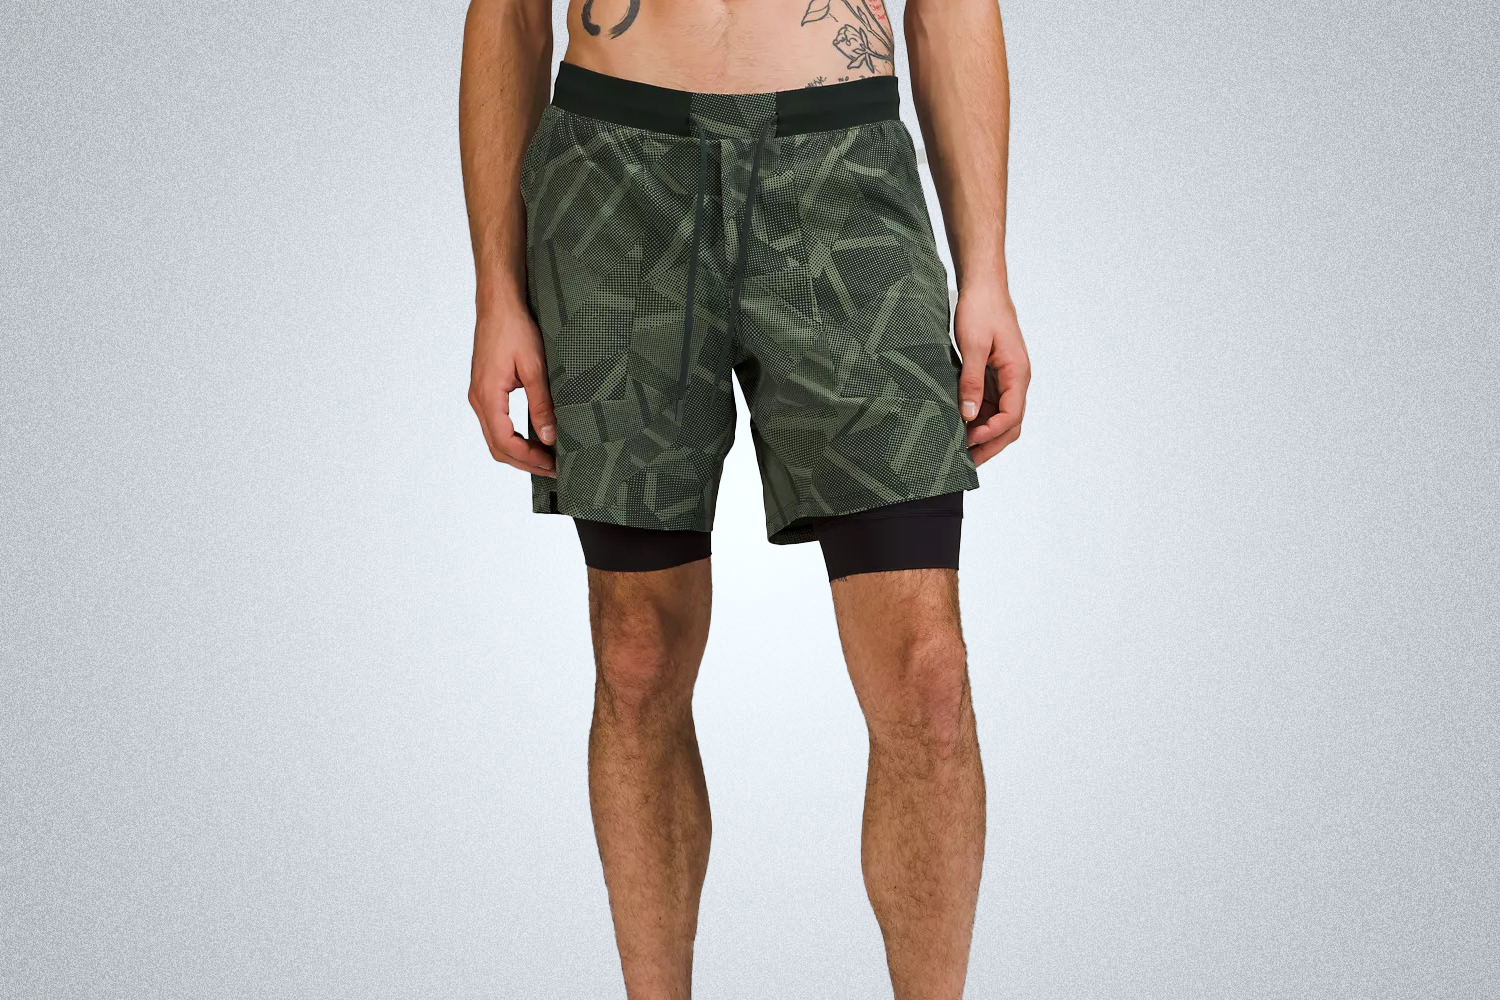 The Lululemon License to Train Lined 7" Short is lightweight and moisture-wicking for workouts and days of fitness